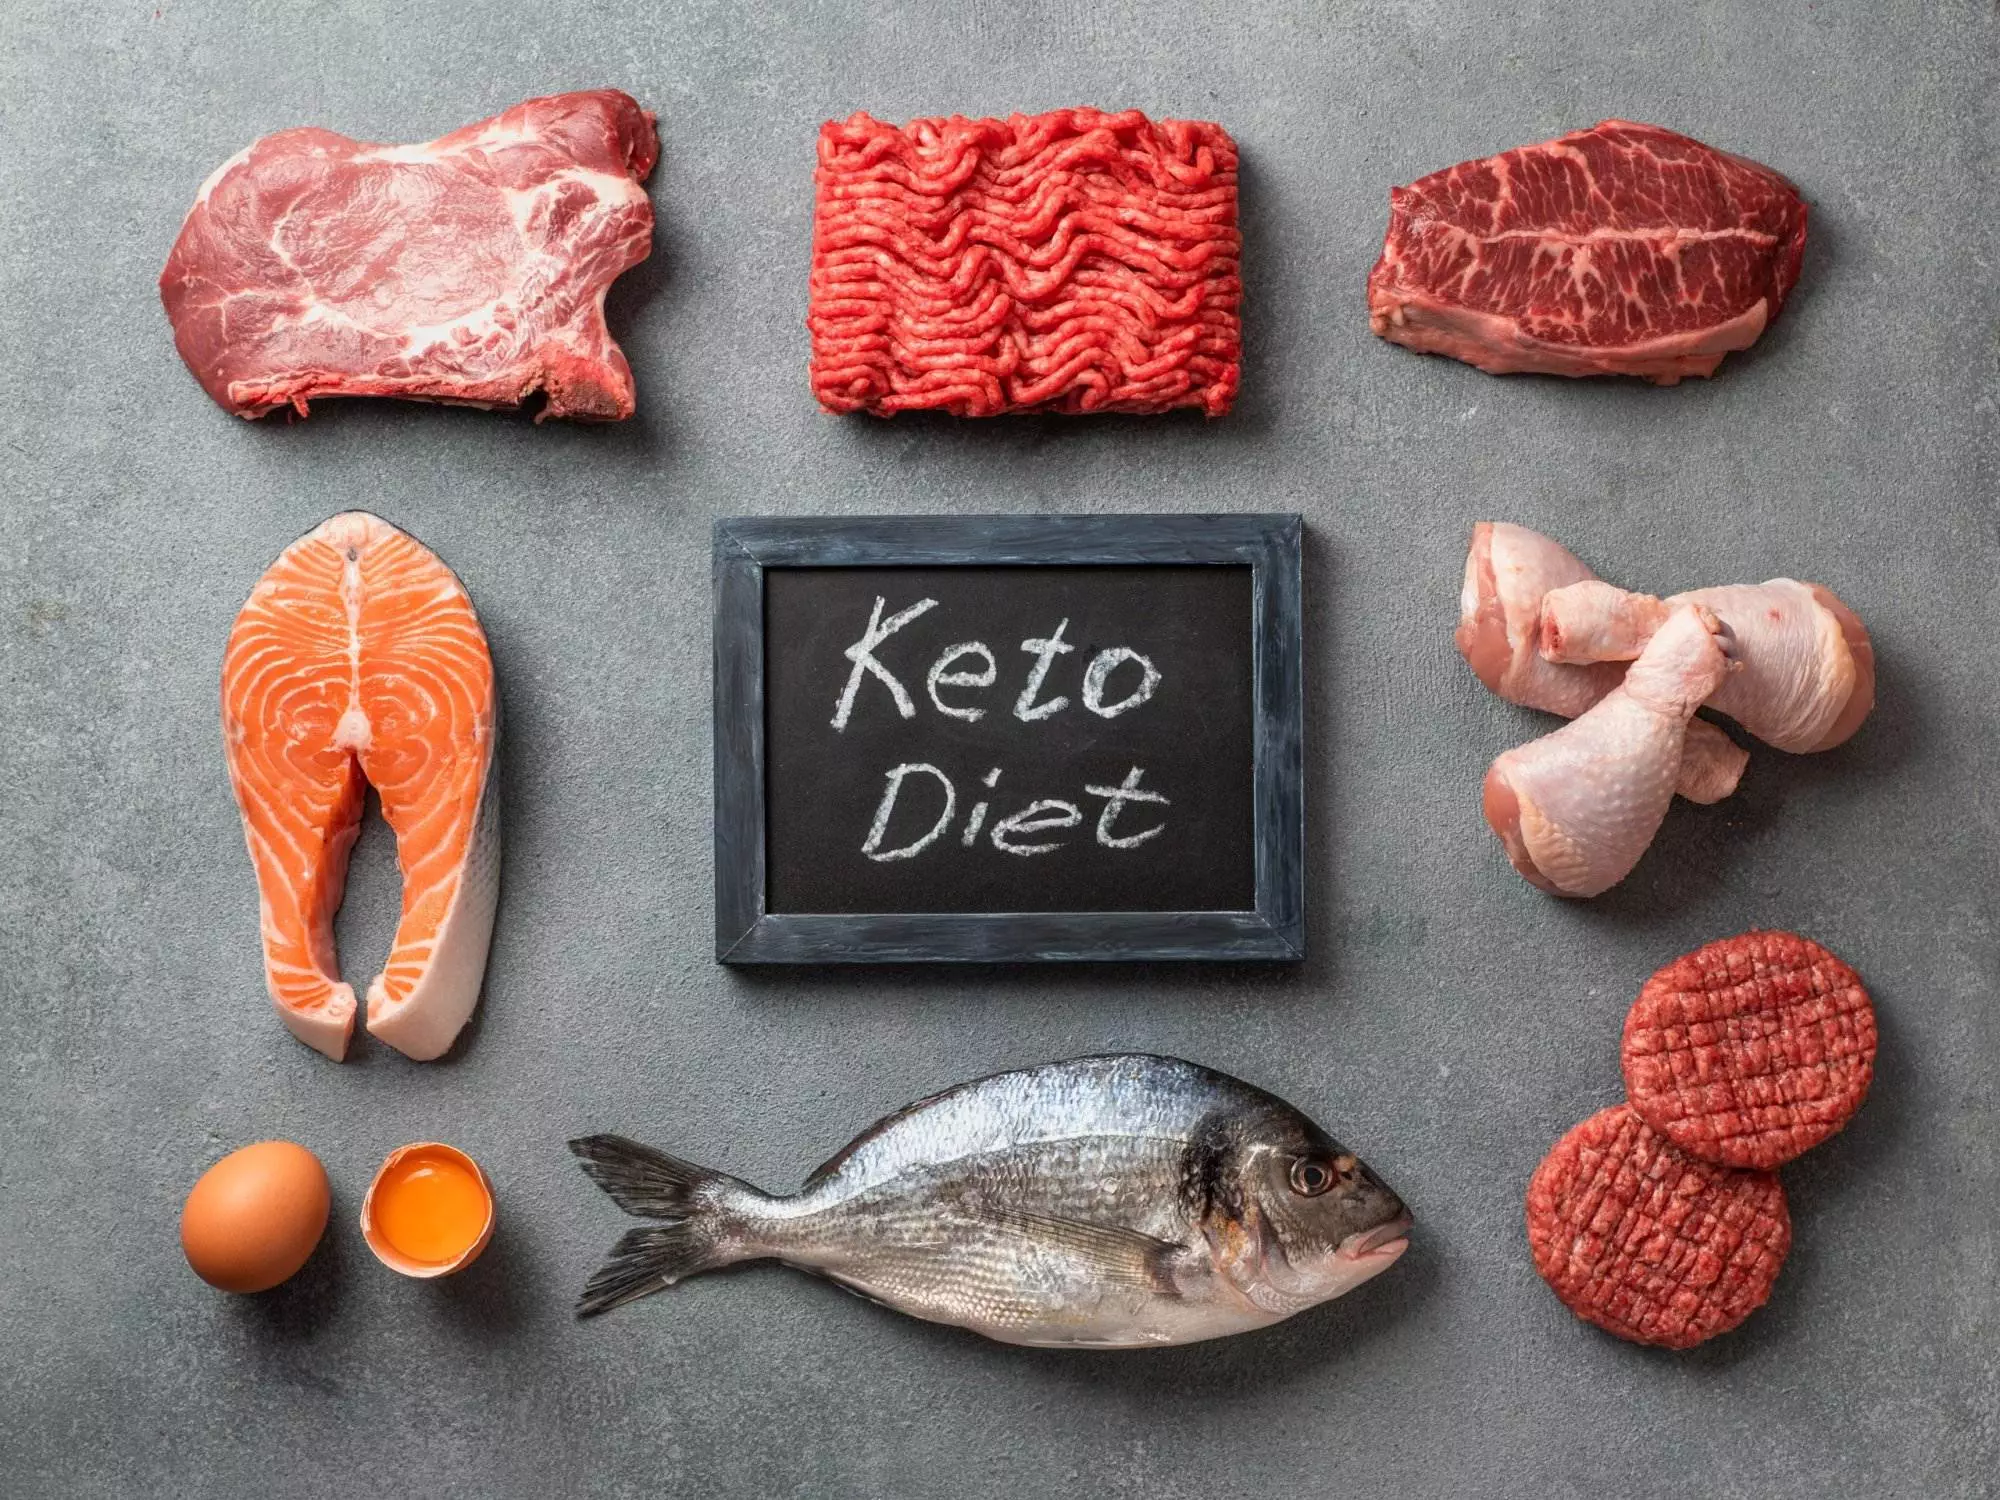 Variety of meats and fish for keto diet